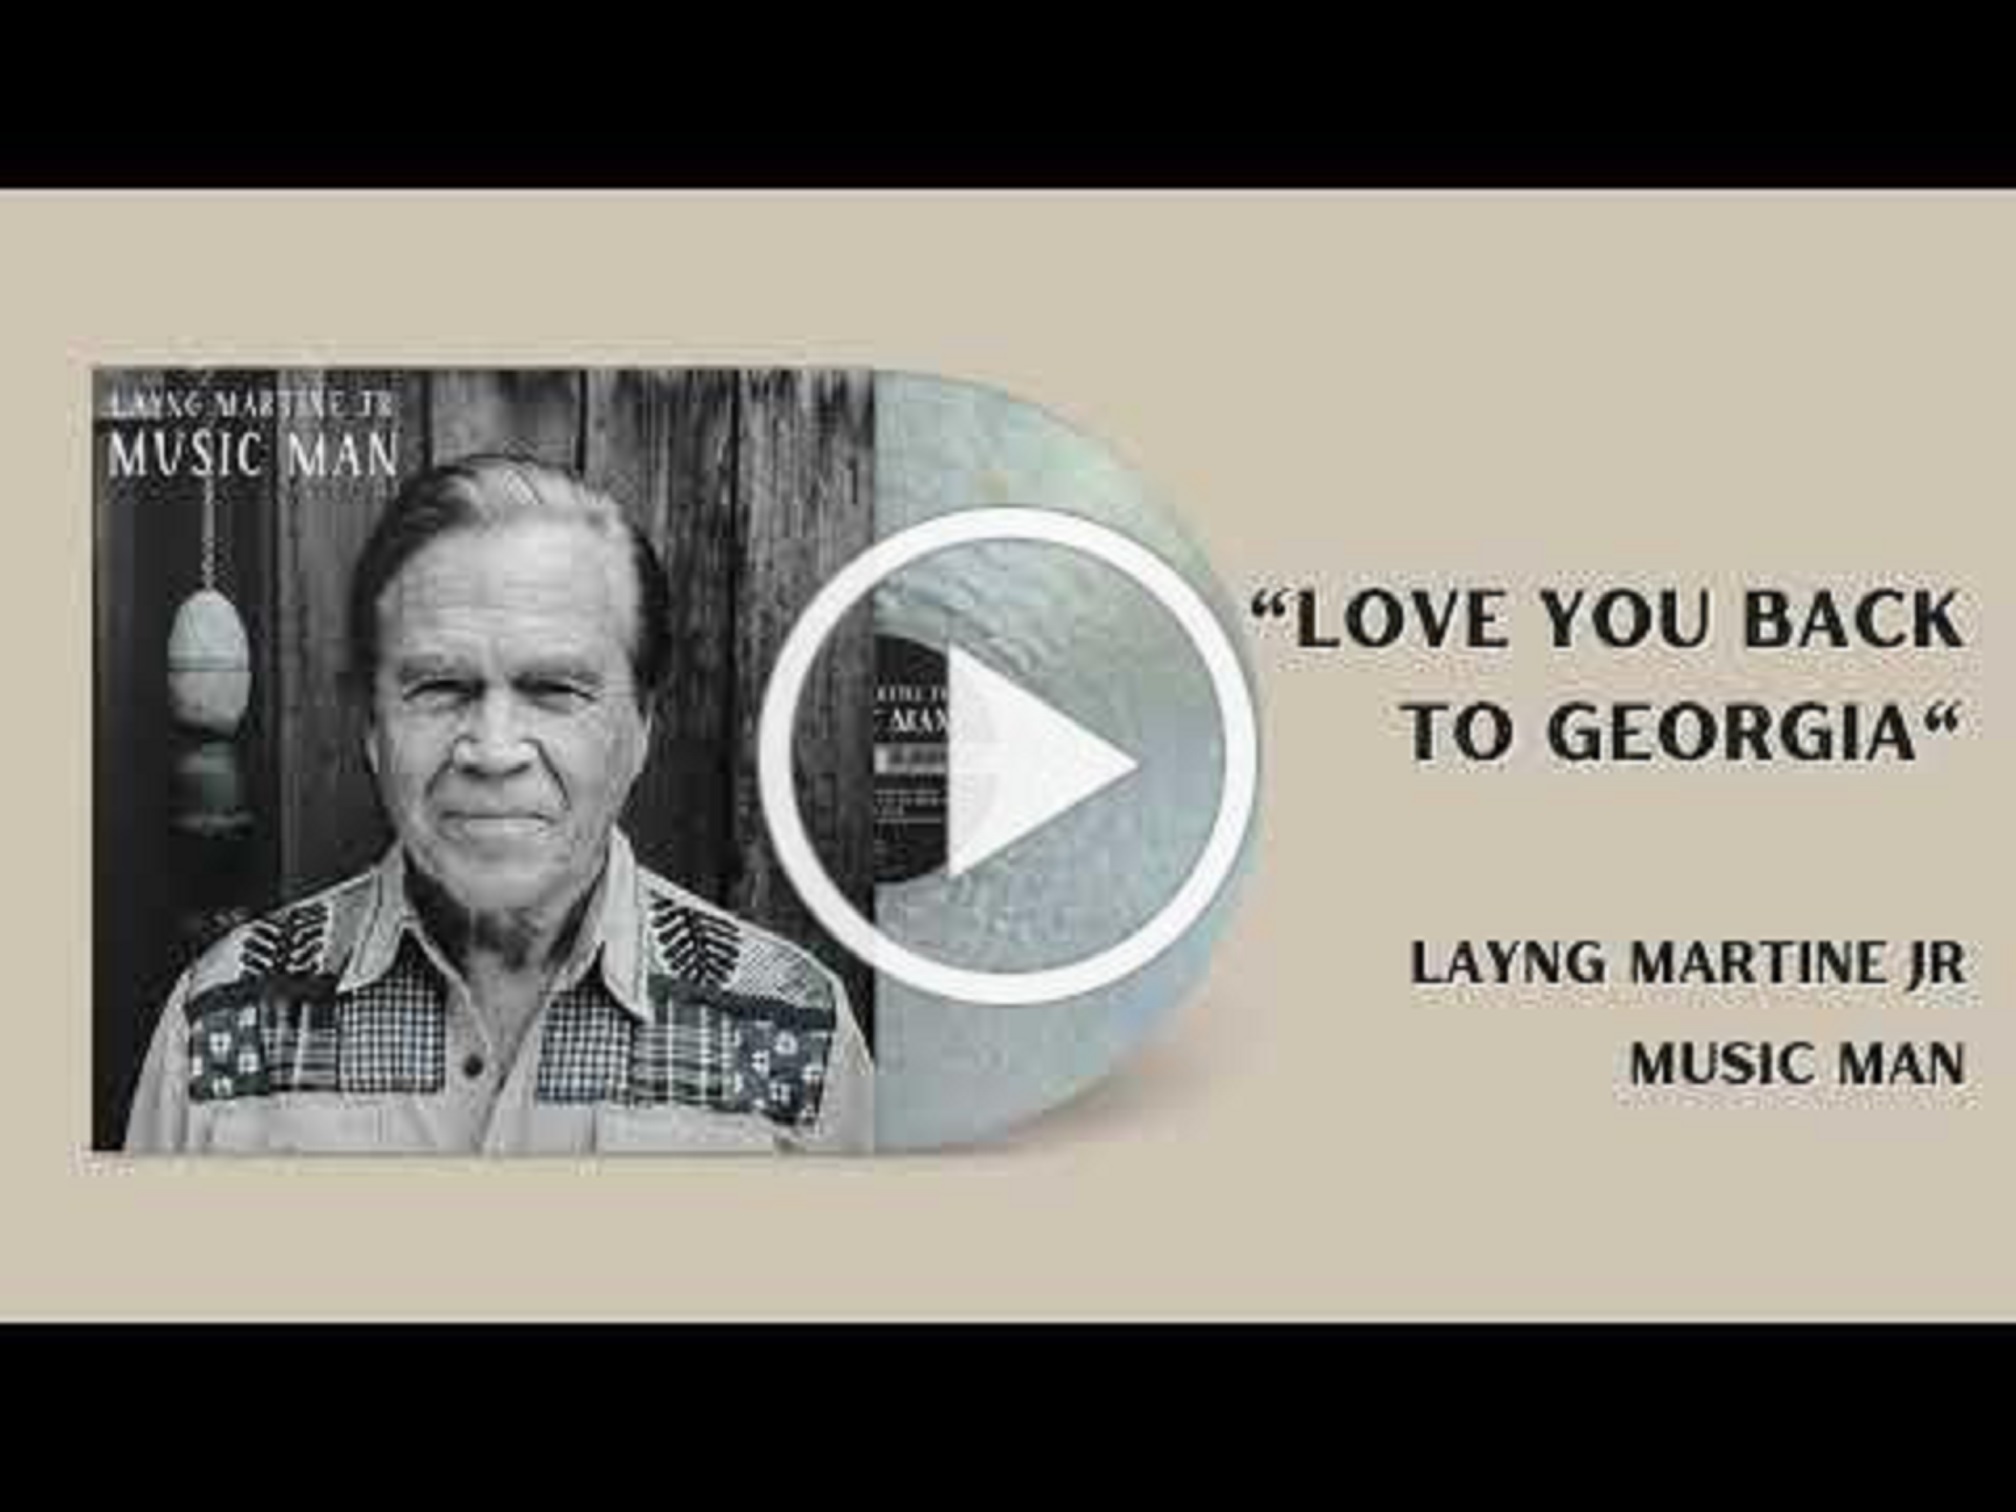 LAYNG MARTINE Jr. shares new single "Love You Back To Georgia"